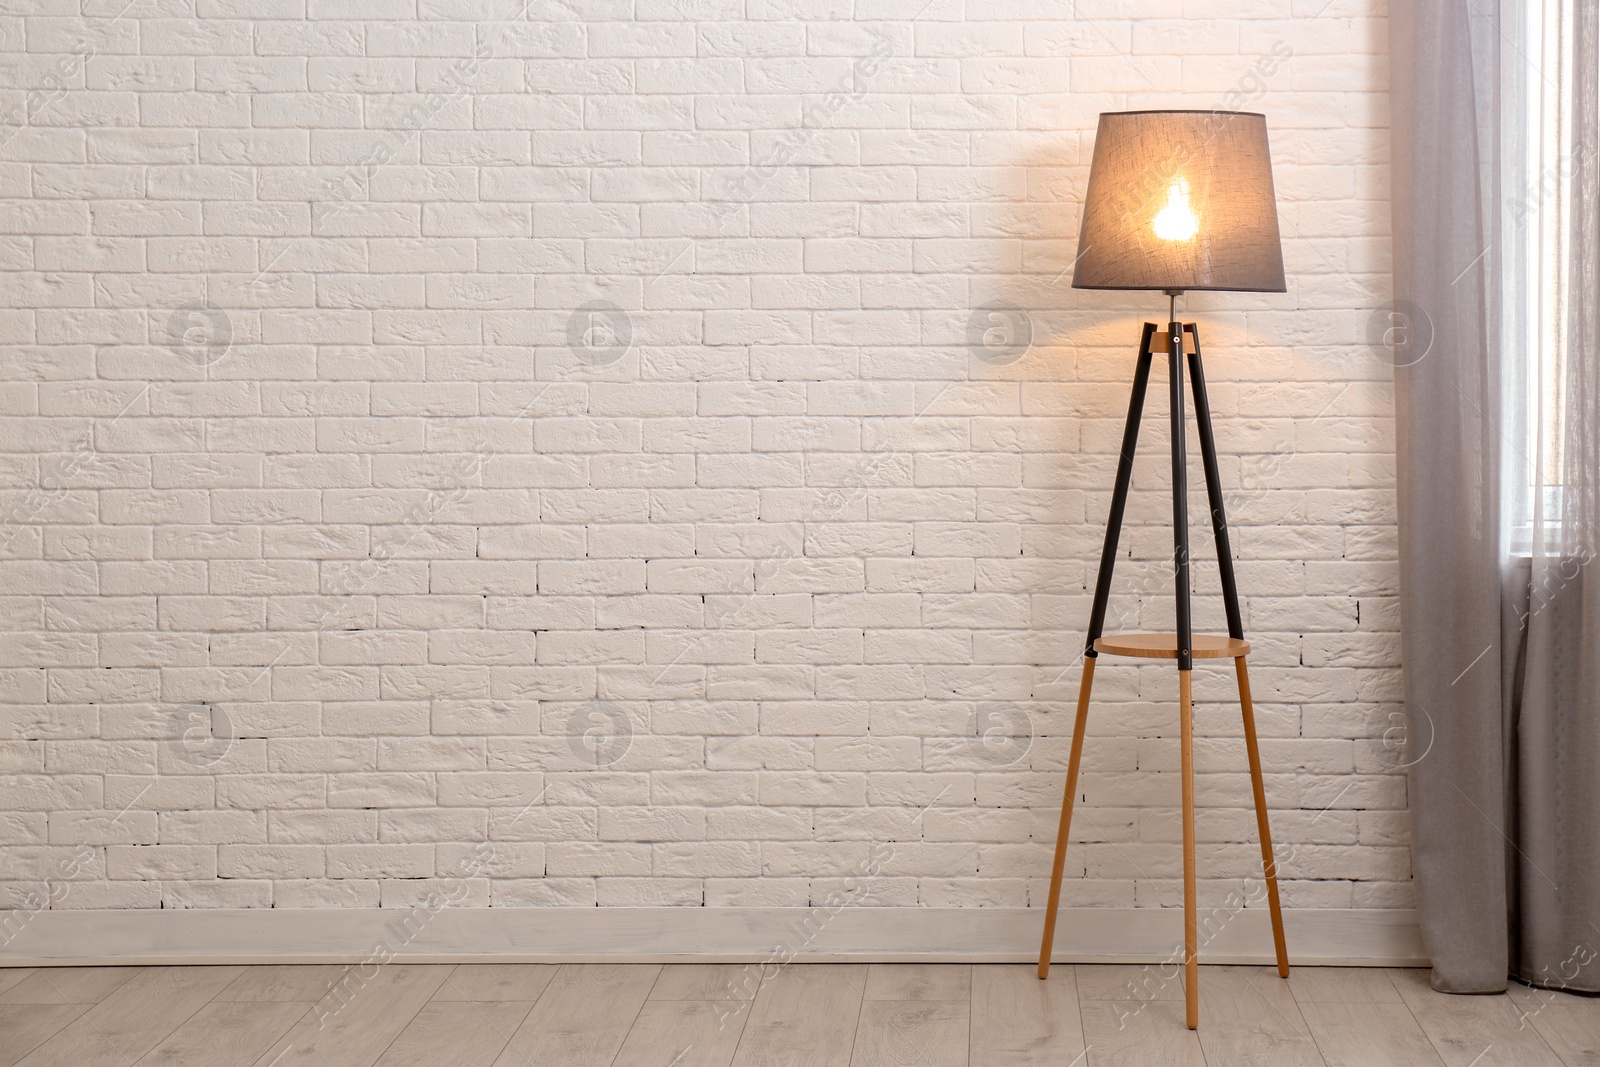 Photo of Modern floor lamp against brick wall indoors. Space for text